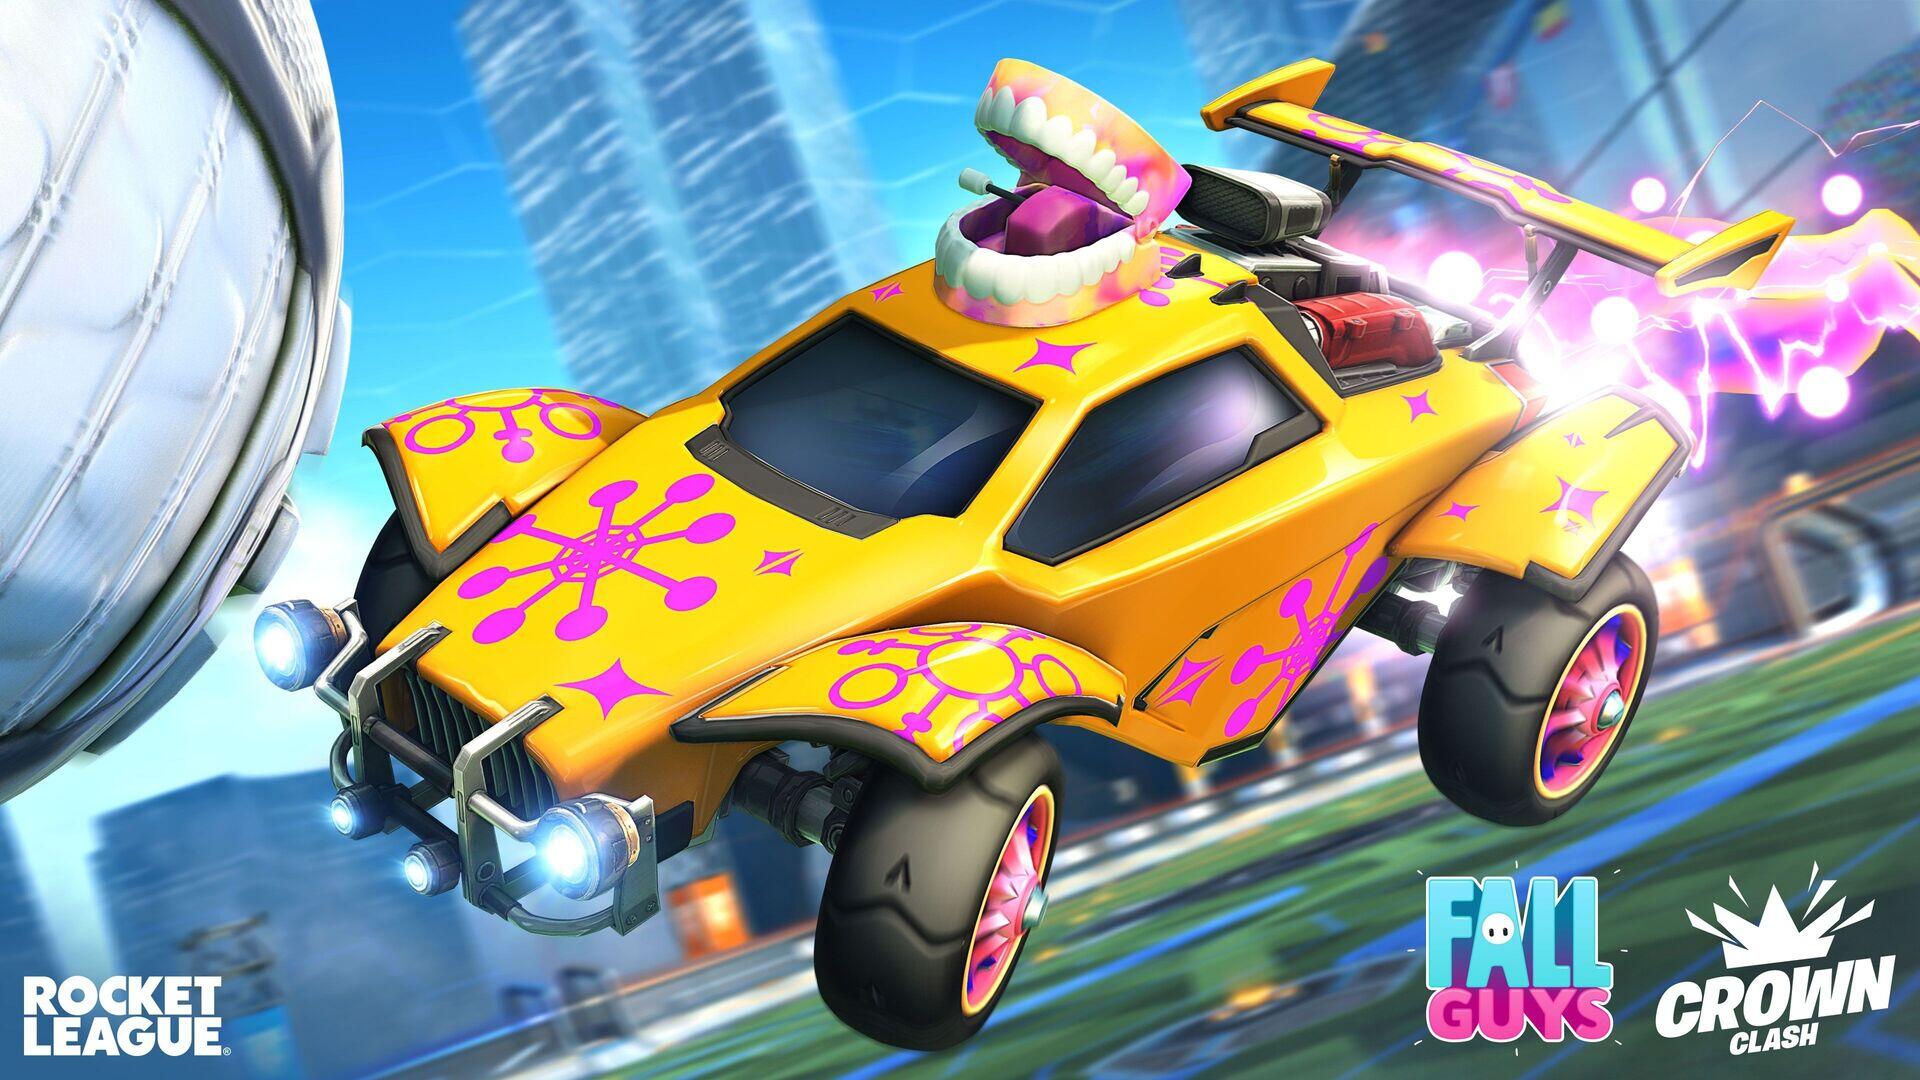 Get Rocket League Rewards as Fall Guys Goes Free on All Platforms Image